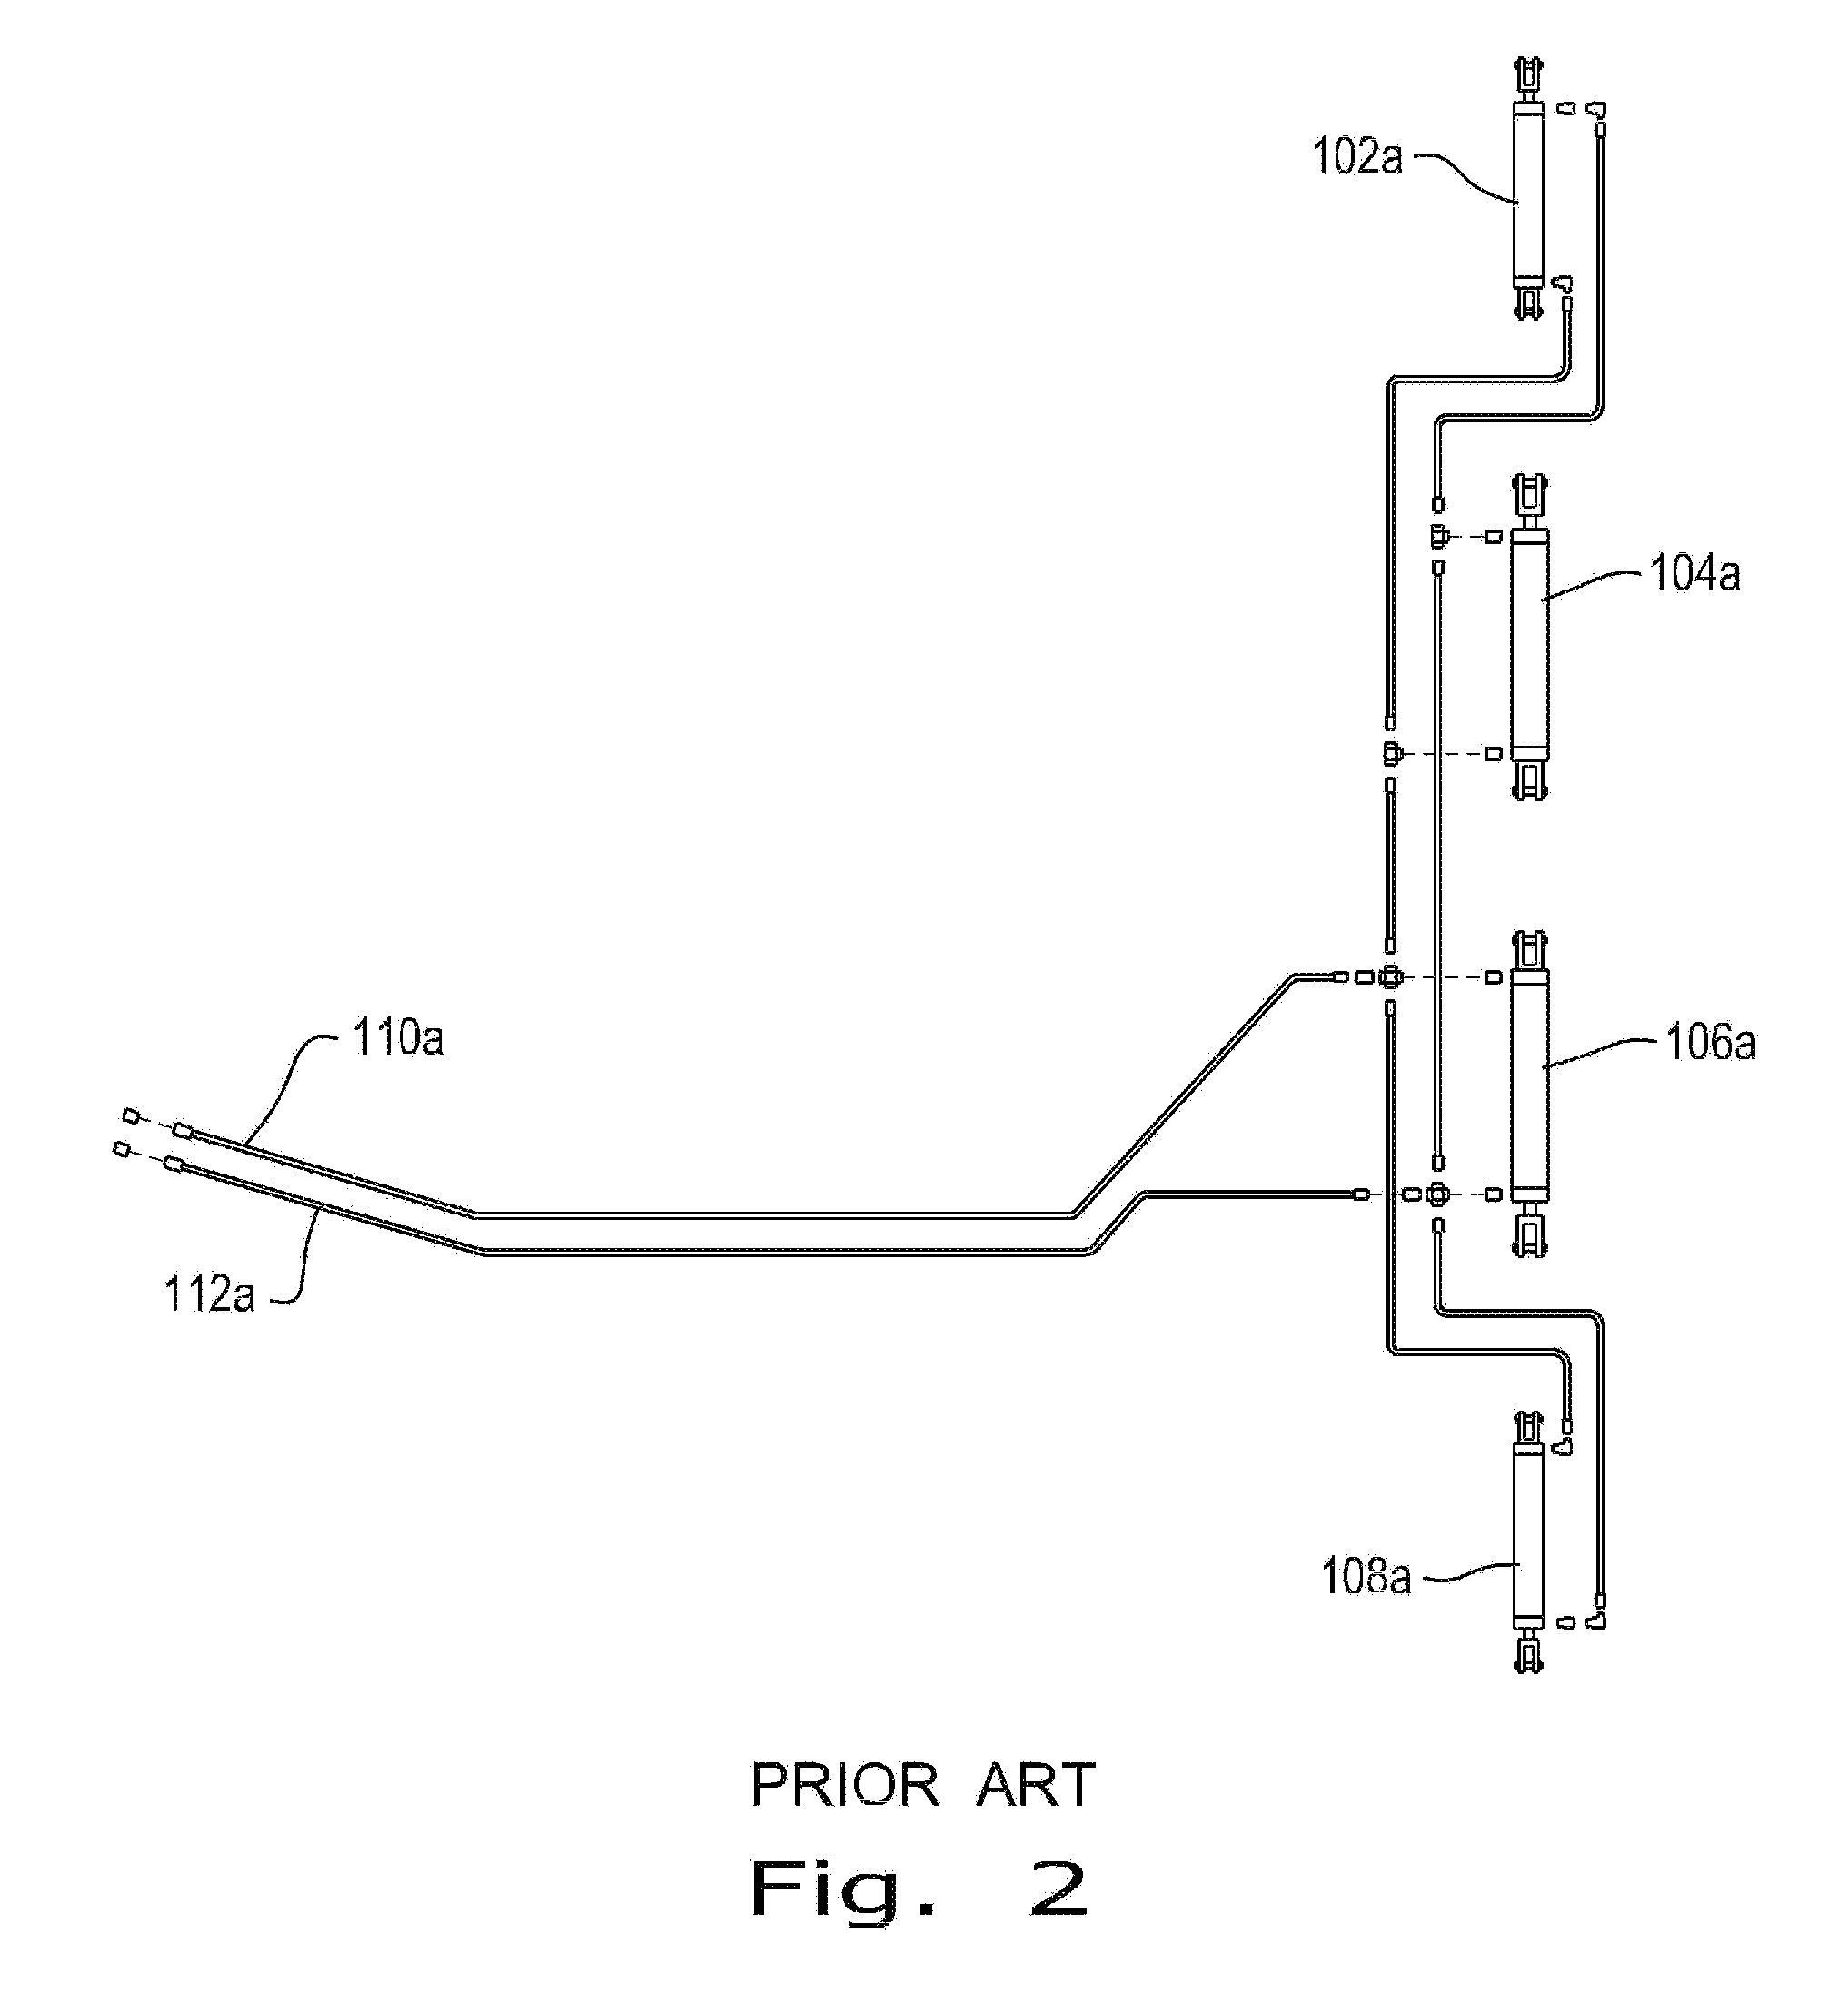 Apparatus and method for air removal in tillage implements using three way valves